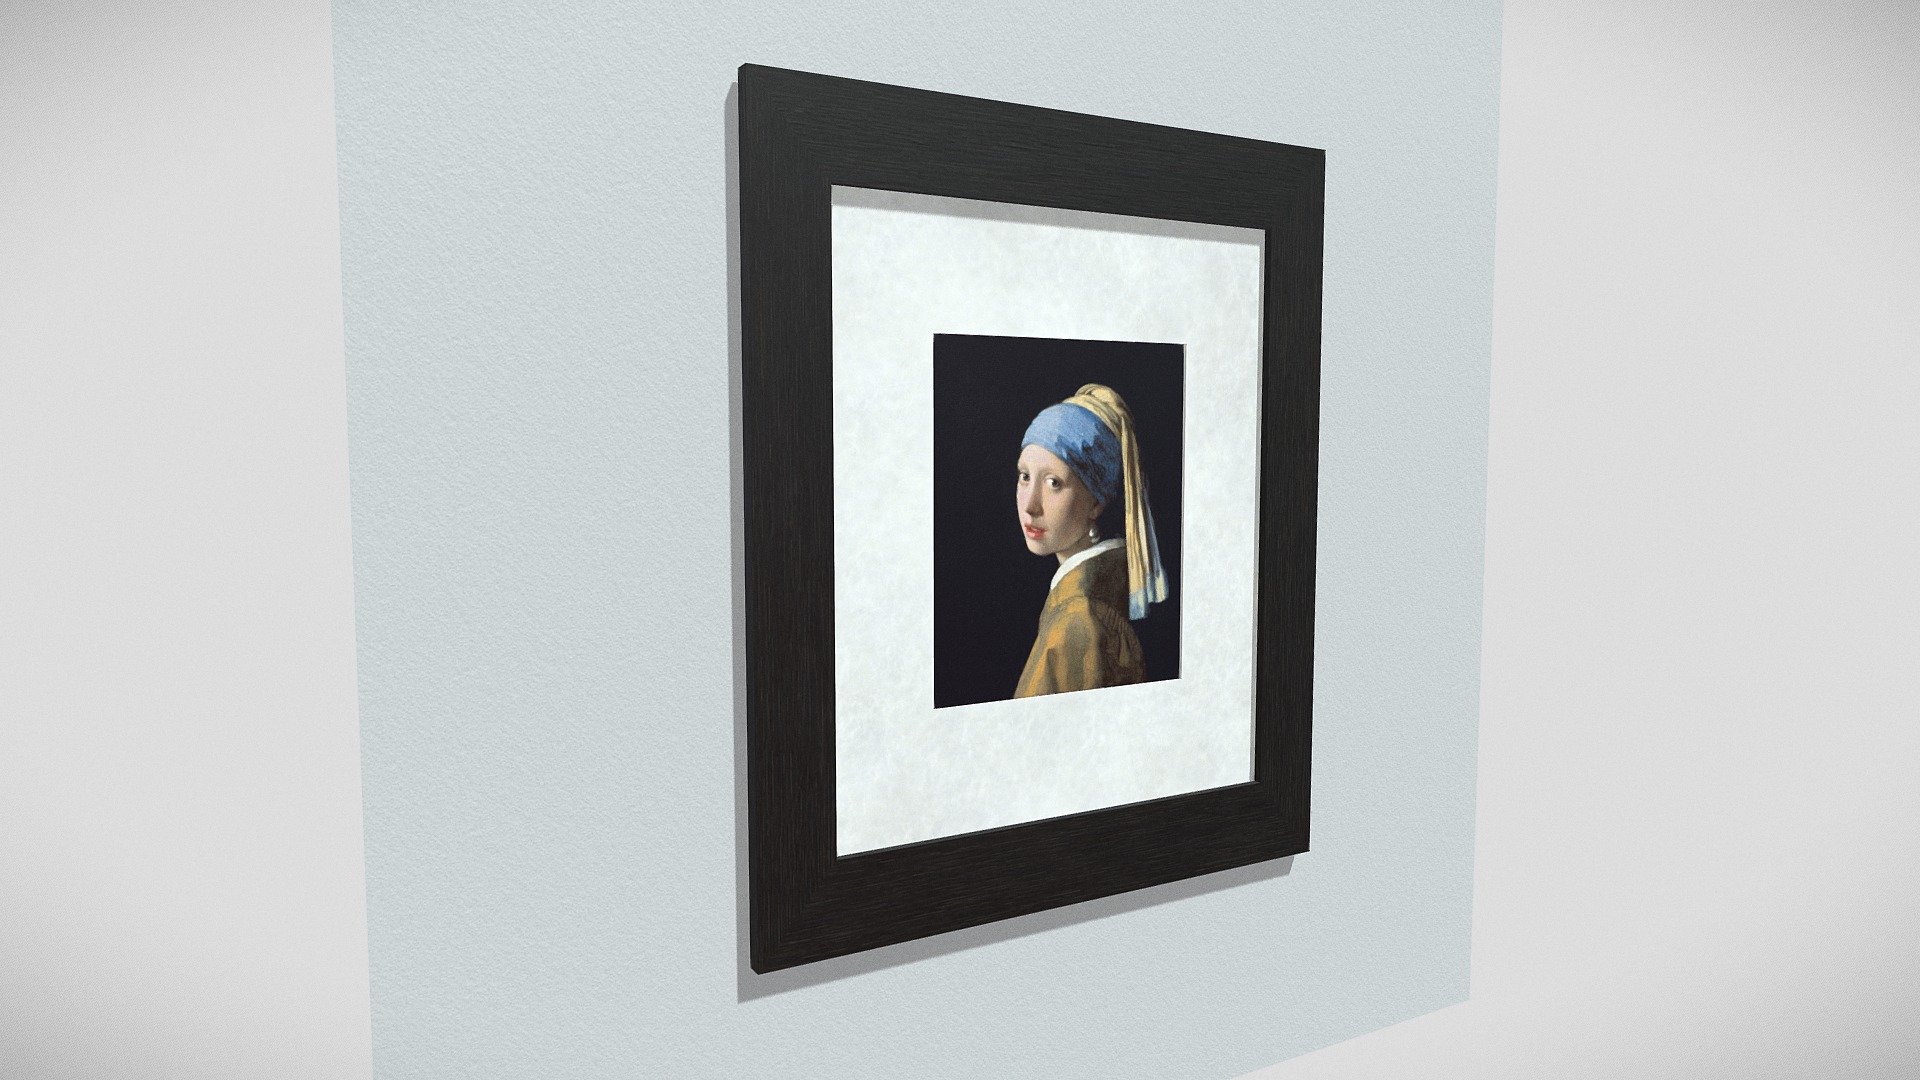 Painting: Girl with a Pearl Earring by Johannes Vermeer.
Frame with PBR textures 3d model